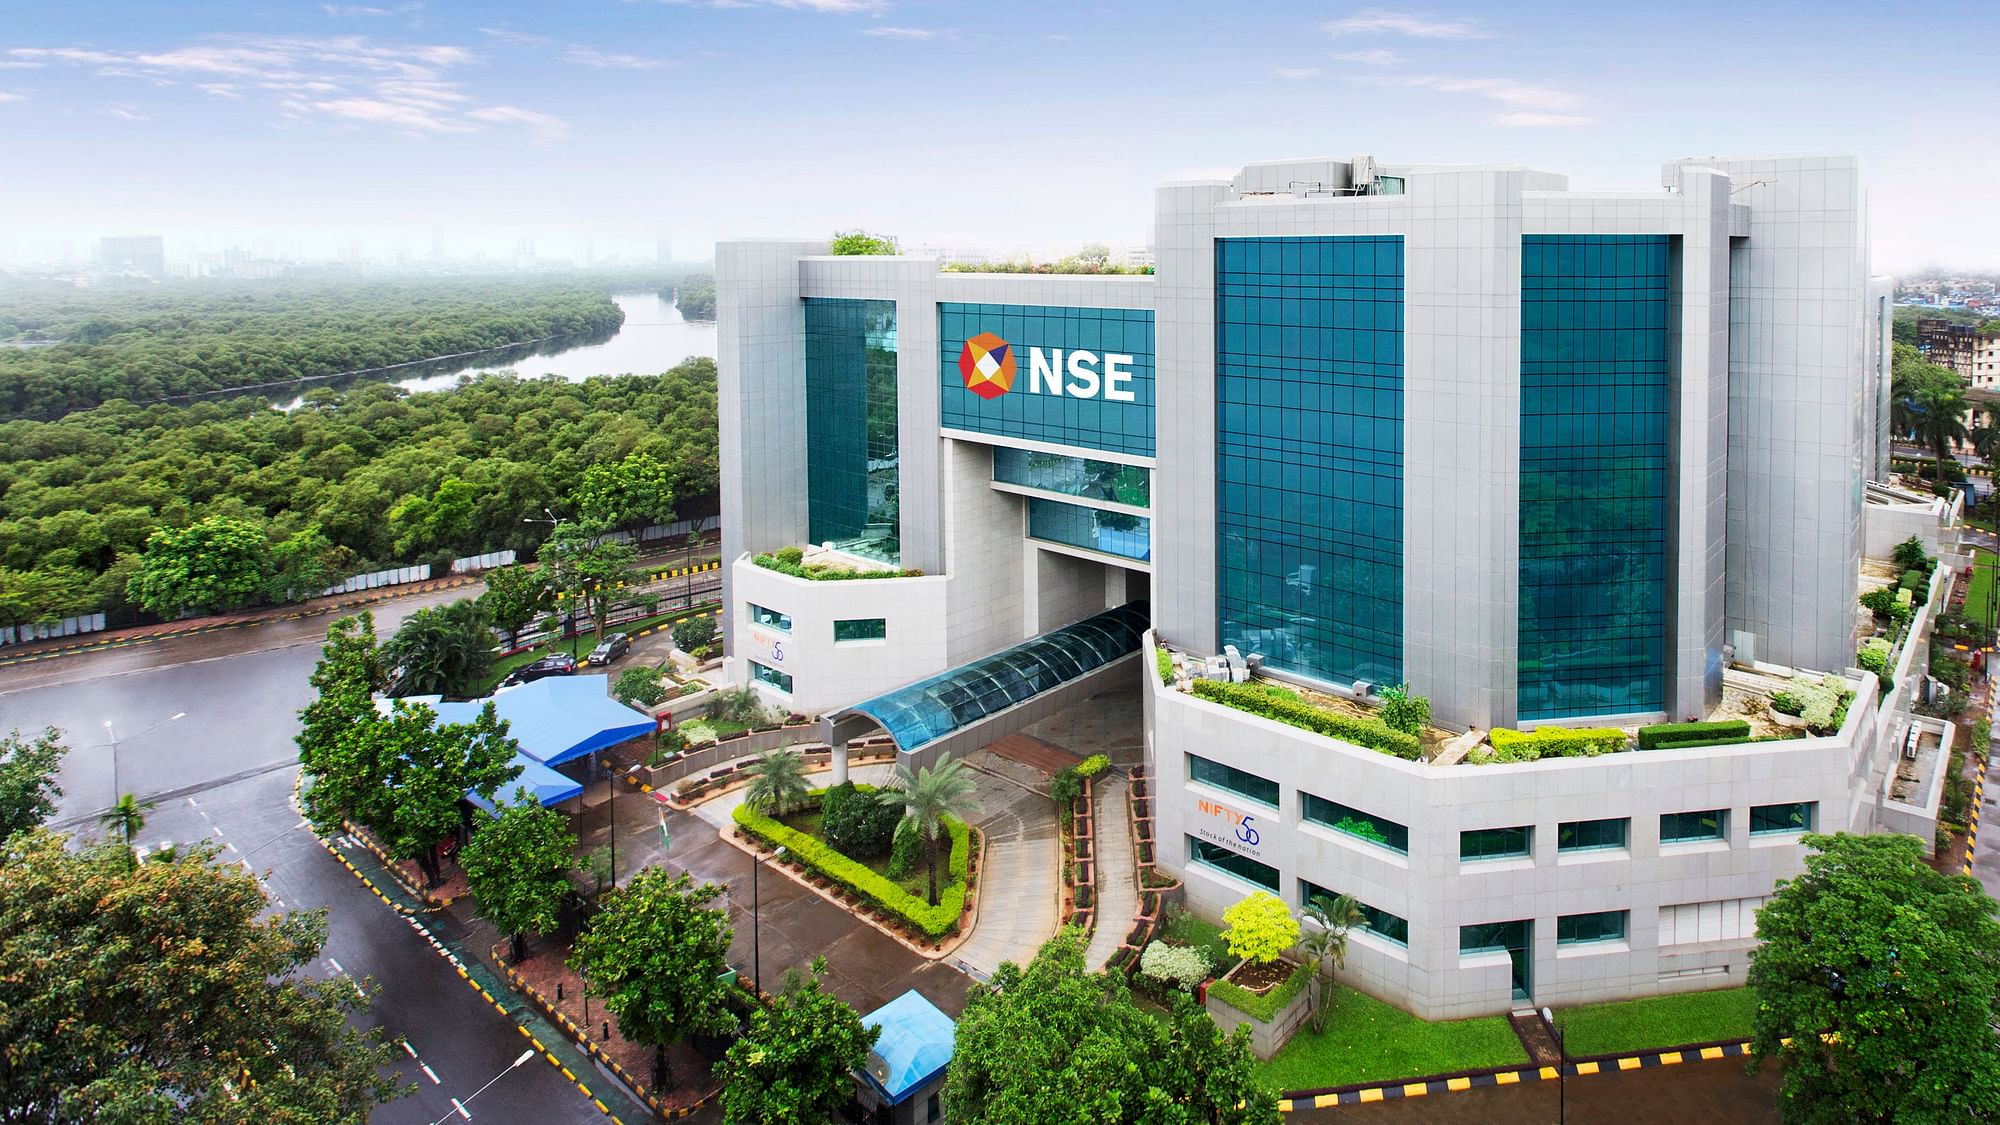 <div class="paragraphs"><p>The Securities and Exchange Board of India (SEBI) has penalised the National Stock Exchange (NSE), and its former CEOs Chitra Ramkrishna and Ravi Narain, over violations in security contract rules and lapses in the hiring procedure for senior-level appointments.</p></div>